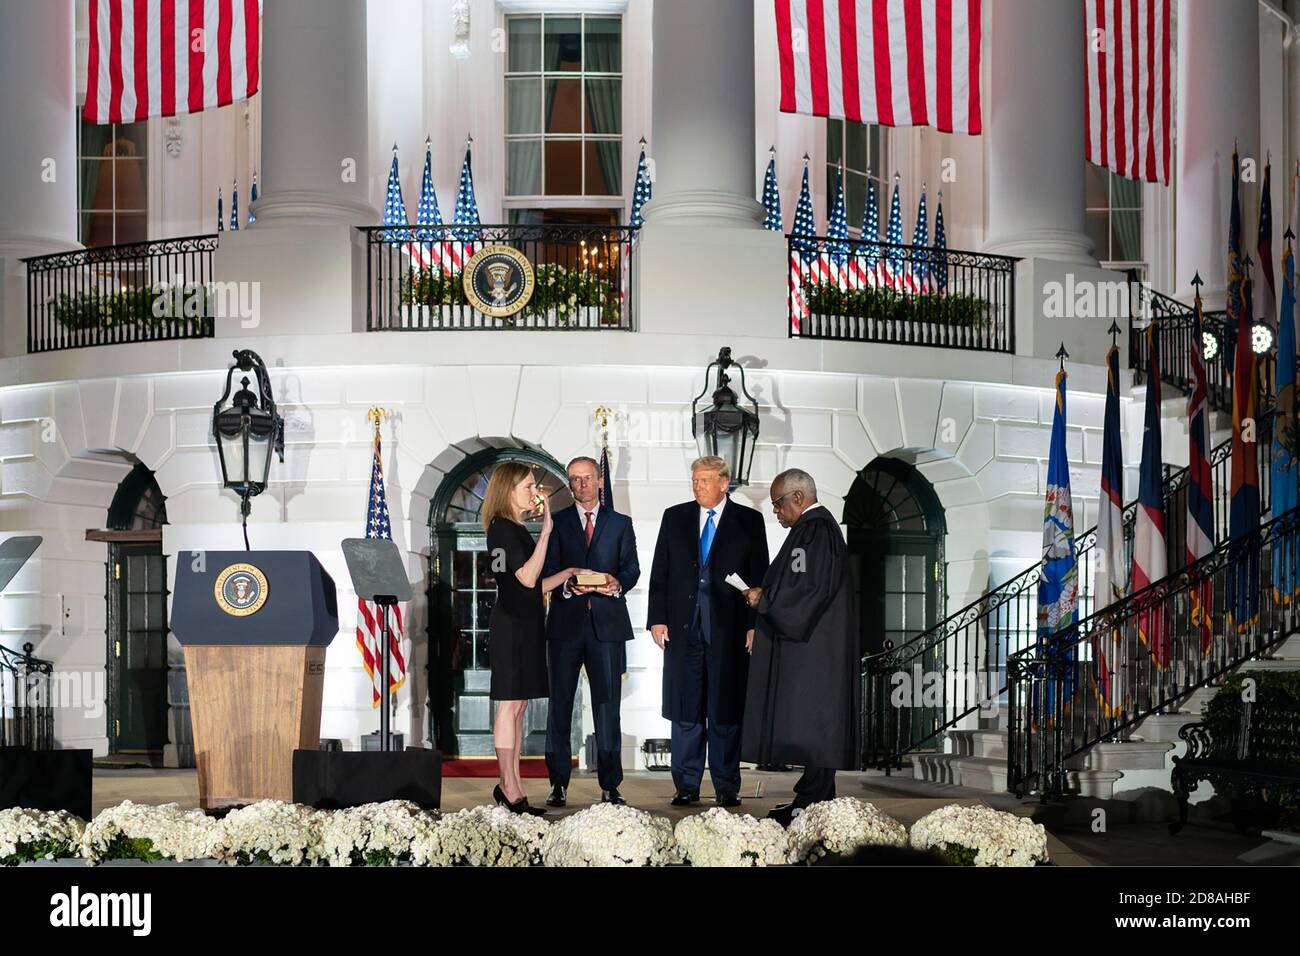 President Donald J. Trump looks on as U.S. Supreme Court Associate Justice Clarence Thomas swears in Judge Amy Coney Barrett to be the Supreme Court's 115th associate justice Monday, Oct. 23, 2020, on the South Lawn of the White House in Washington, D.C. Justice Barrett is joined by her husband Jesse, holding the Bible, and their children. (USA) Stock Photo